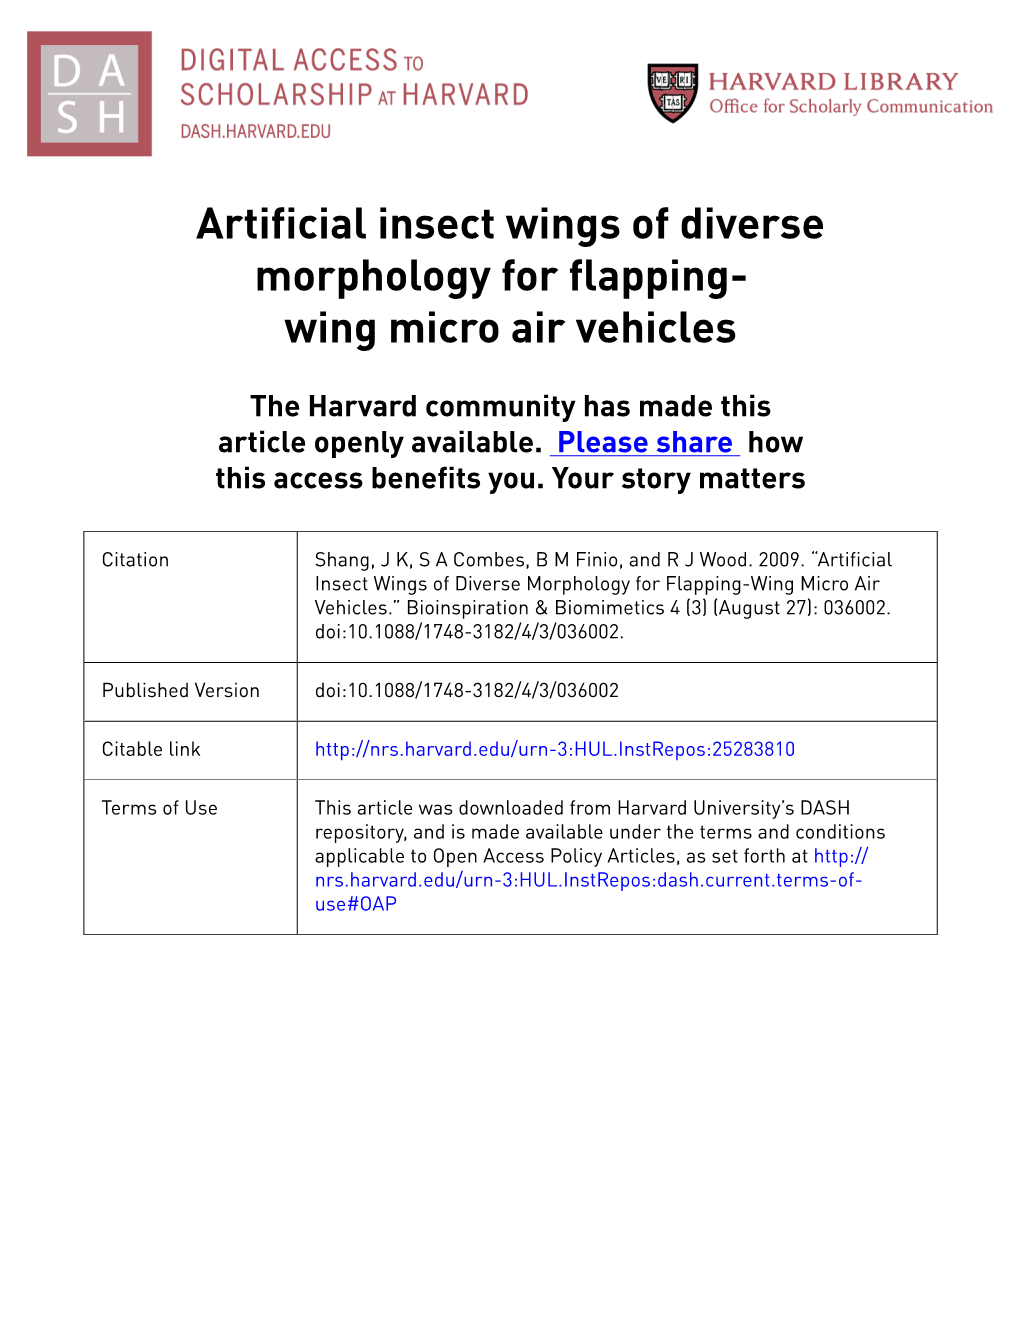 Artificial Insect Wings of Diverse Morphology for Flapping- Wing Micro Air Vehicles